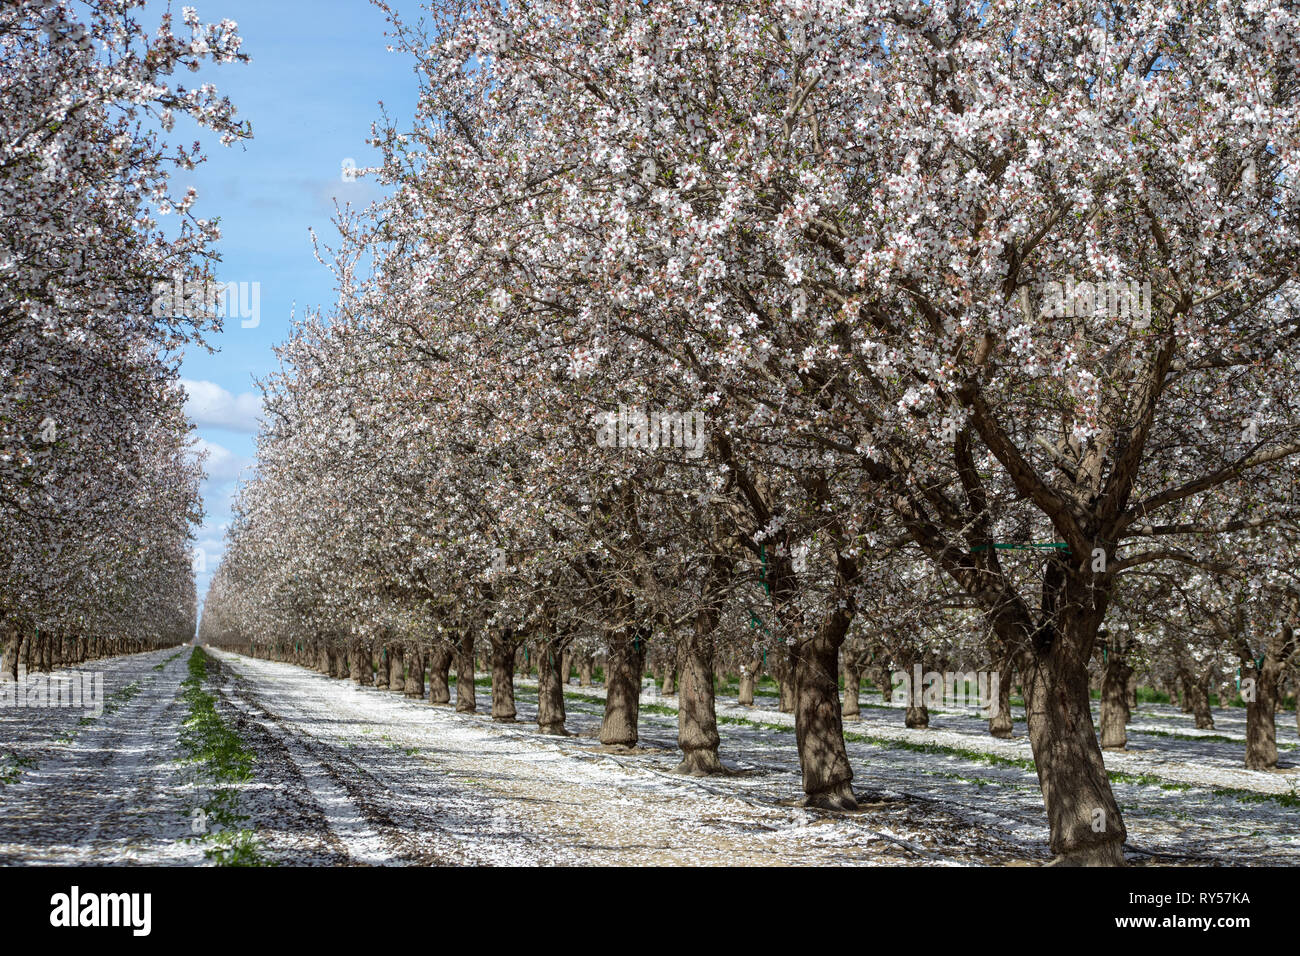 Almond Grove in California with blue sky Stock Photo